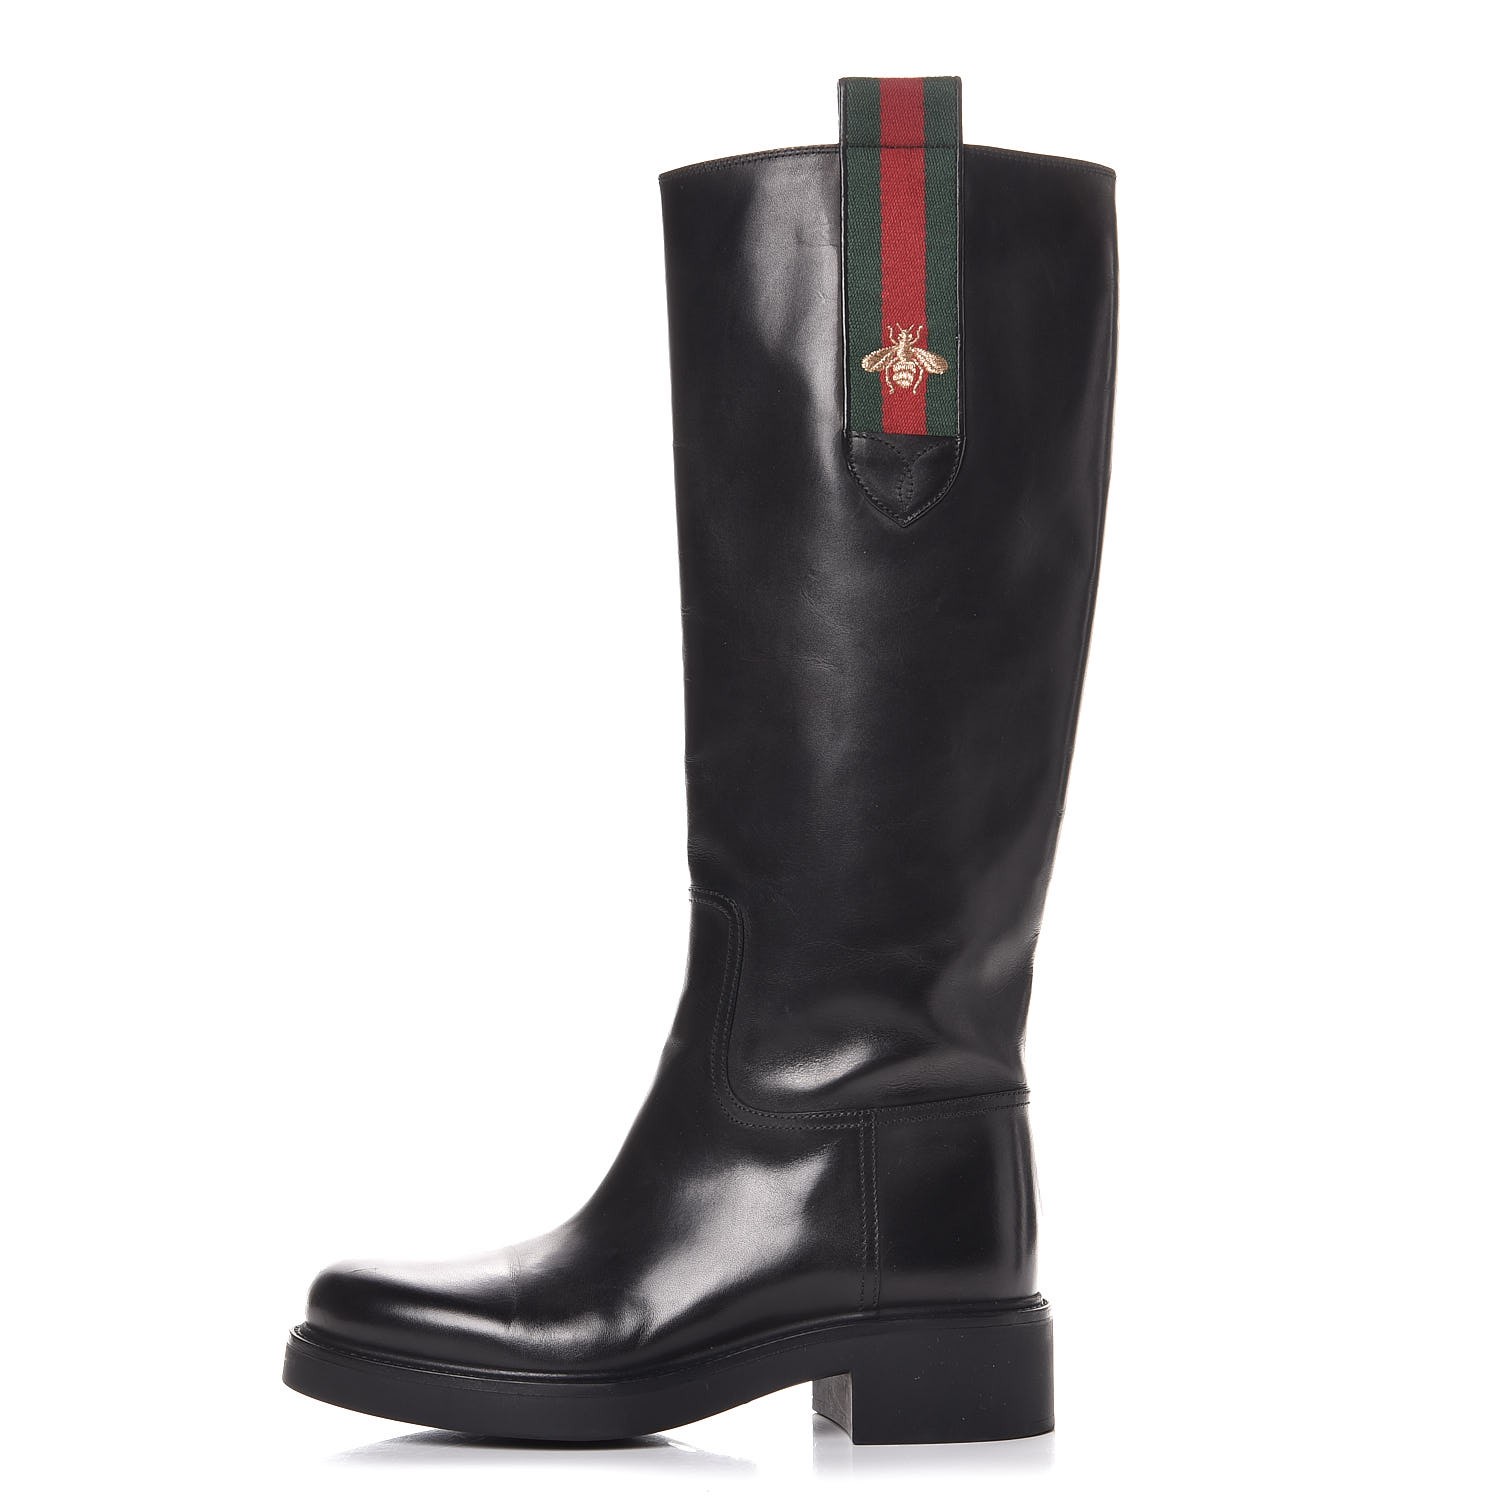 GUCCI Calfskin Web Bee Betis Glamour Riding Boots 37.5 Black 290507